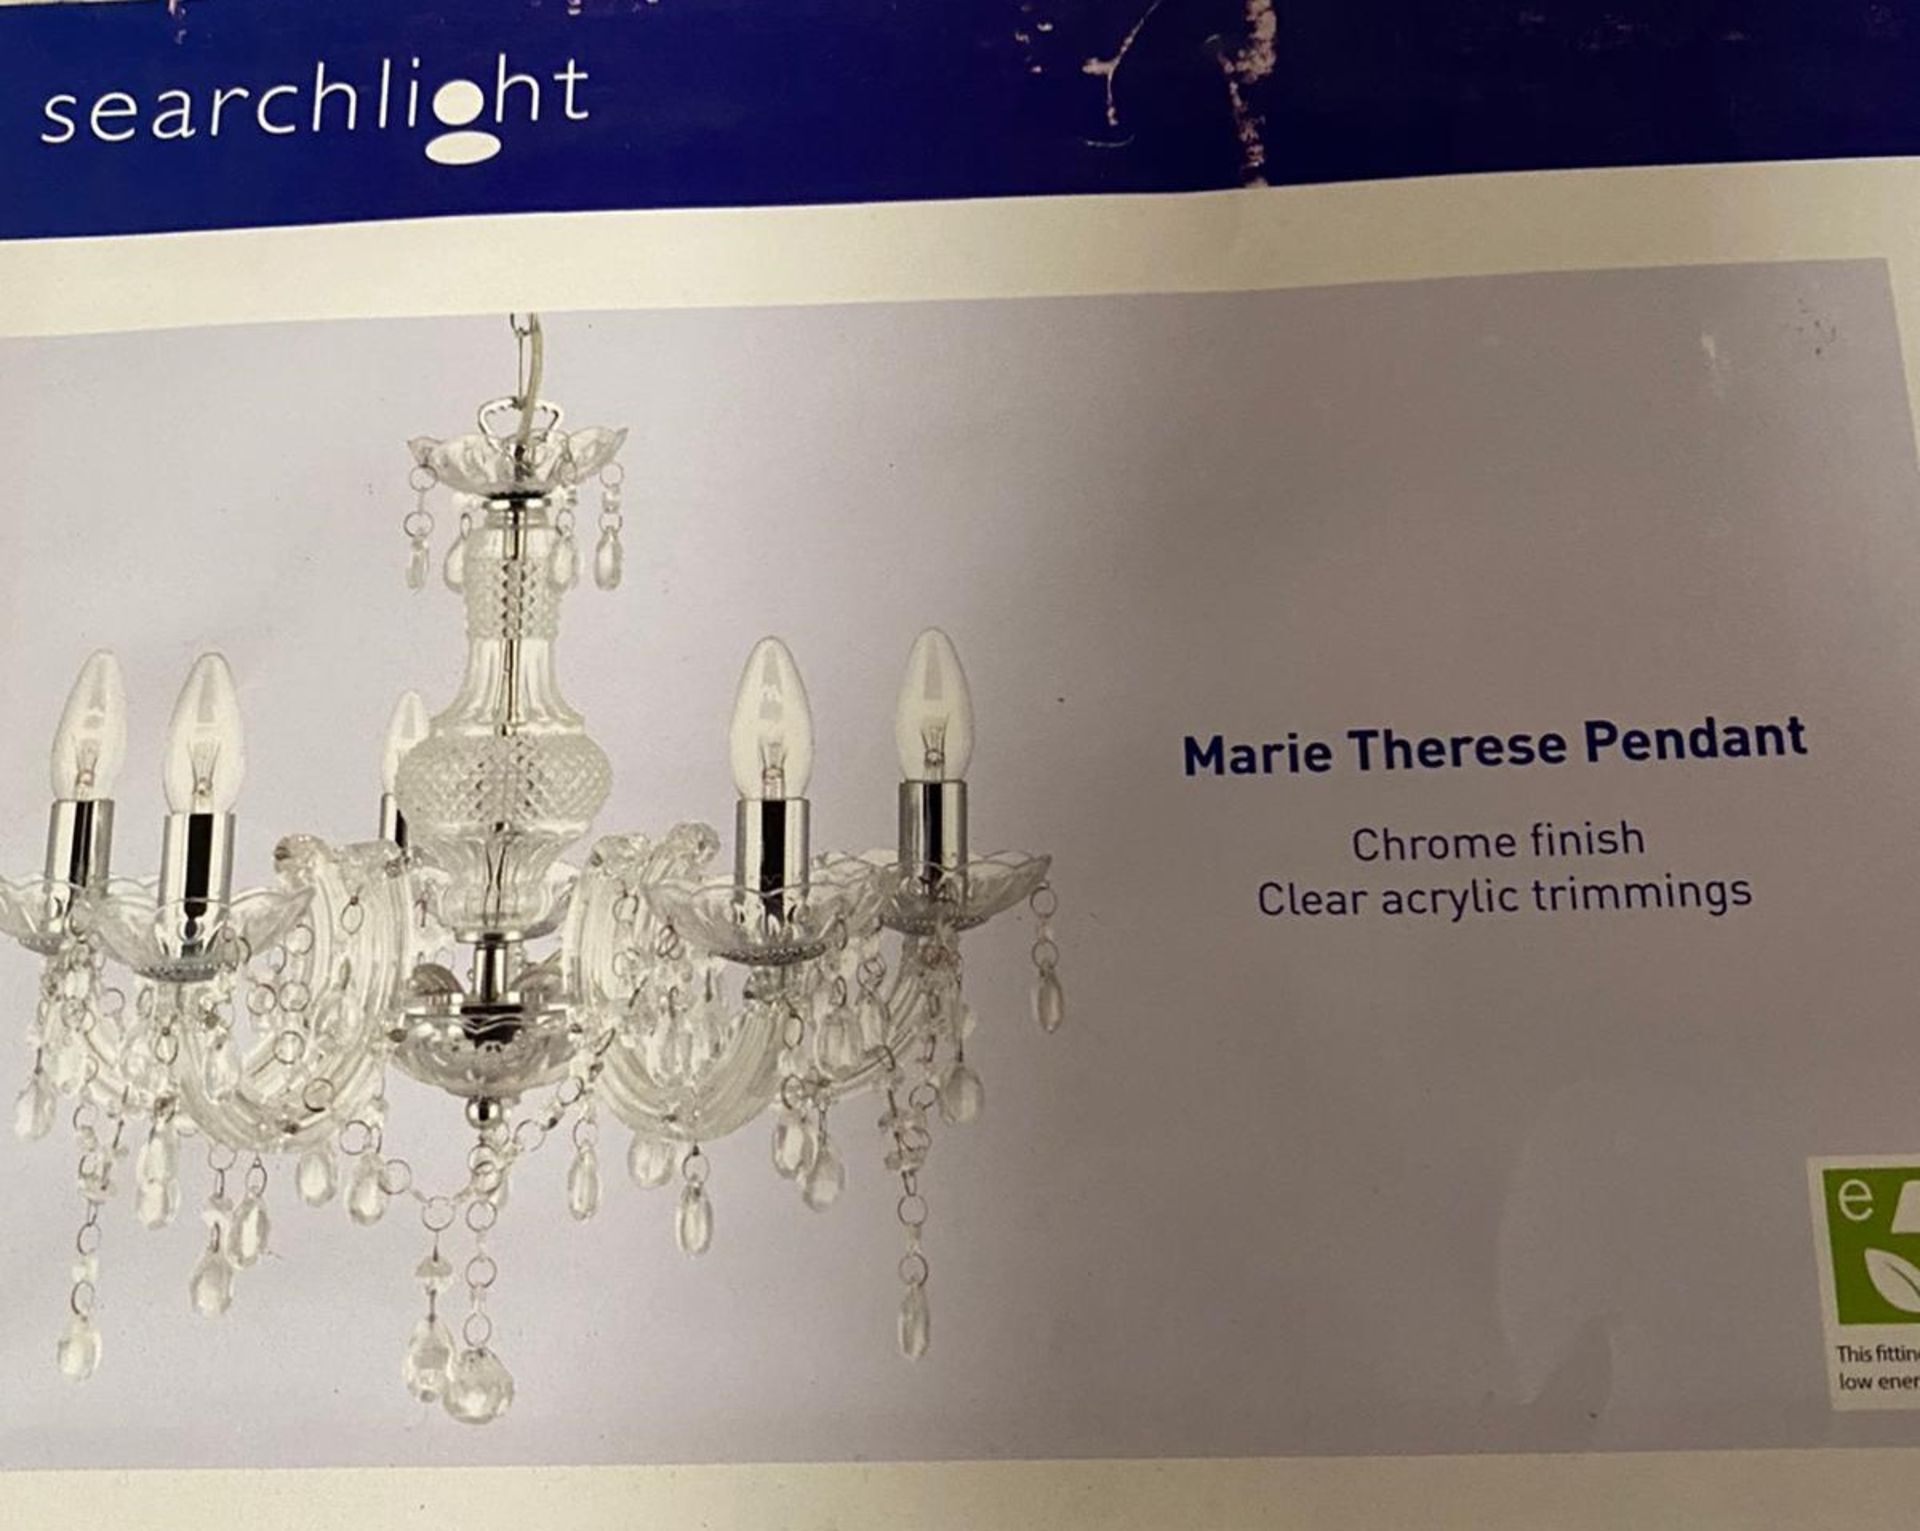 1 x Searchlight marie Therese Pendant in chrome - Ref: 1455-5CL - New and Boxed - RRP: £100.00 - Image 3 of 4